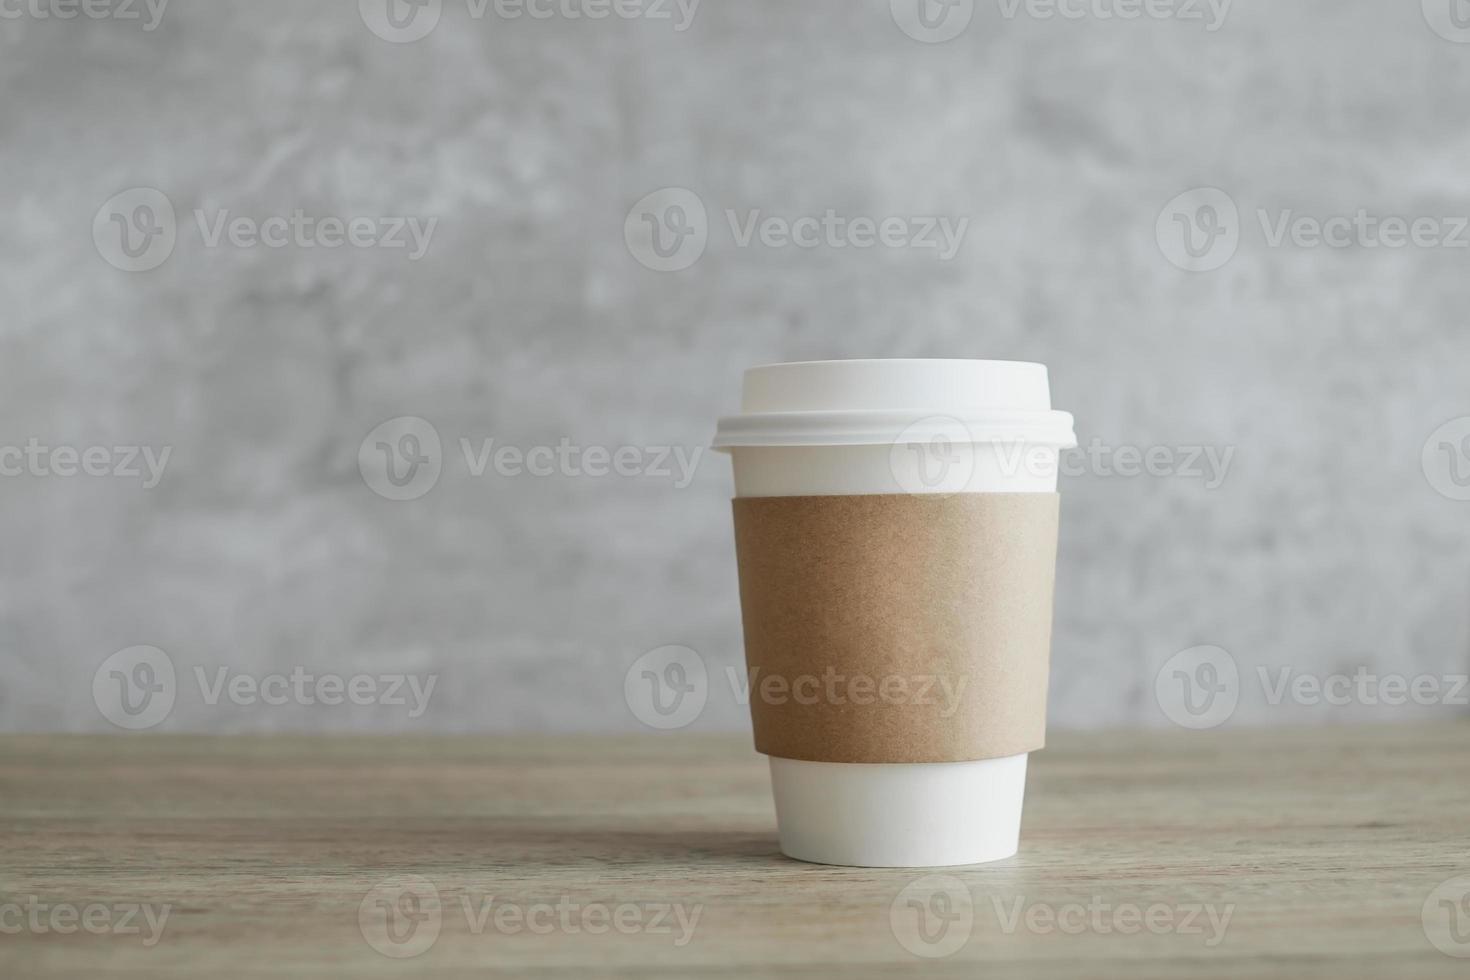 https://static.vecteezy.com/system/resources/previews/012/087/582/non_2x/coffee-paper-cup-on-wooden-table-take-away-hot-drink-photo.jpg